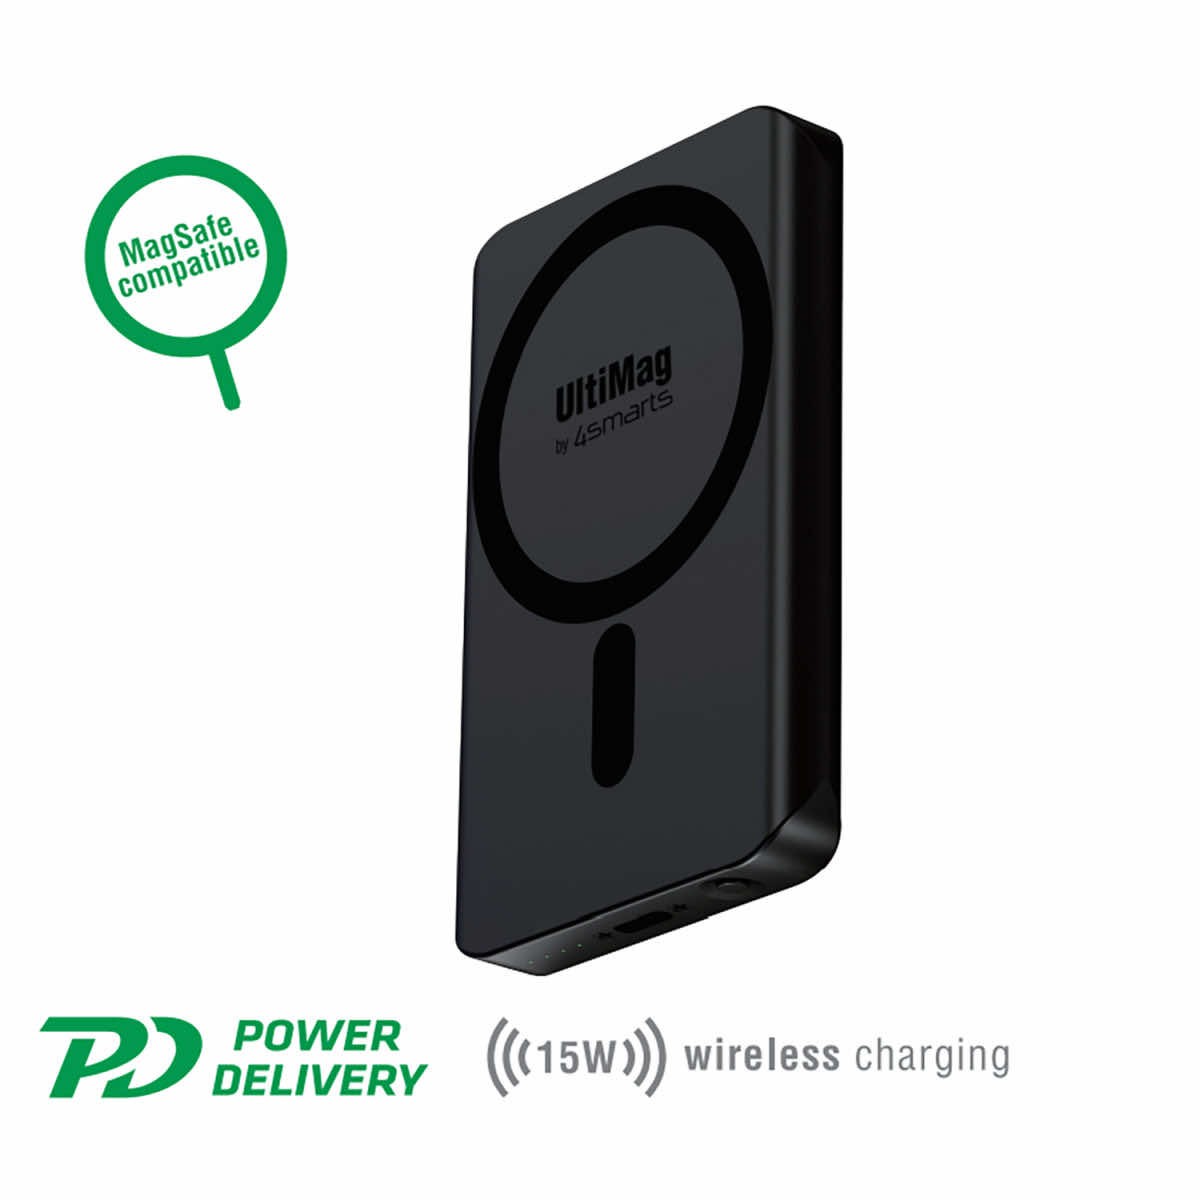 4smarts UltiMag Wireless Charger 200W 20000mAh MagSafe Compatible Power  Bank - Black